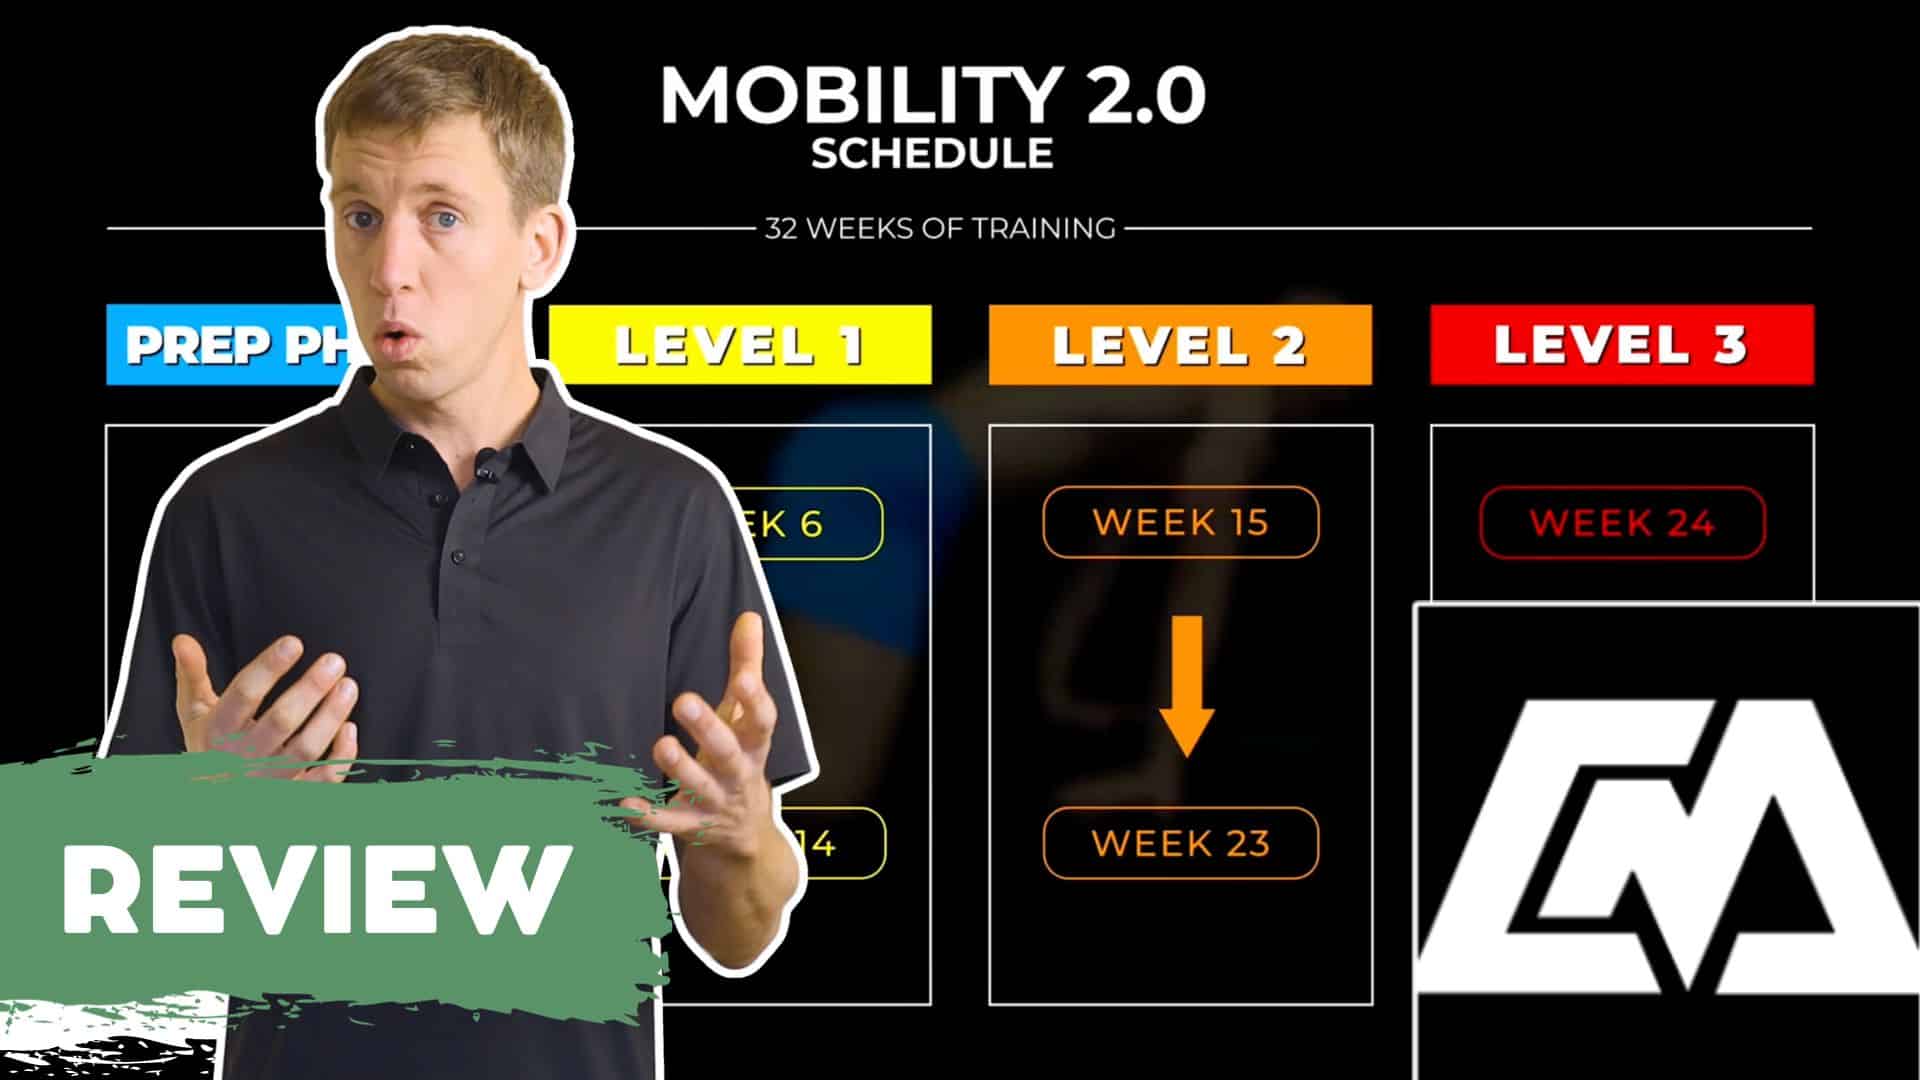 Jelle Smeding is reviewing the mobility 2.- program from cali move